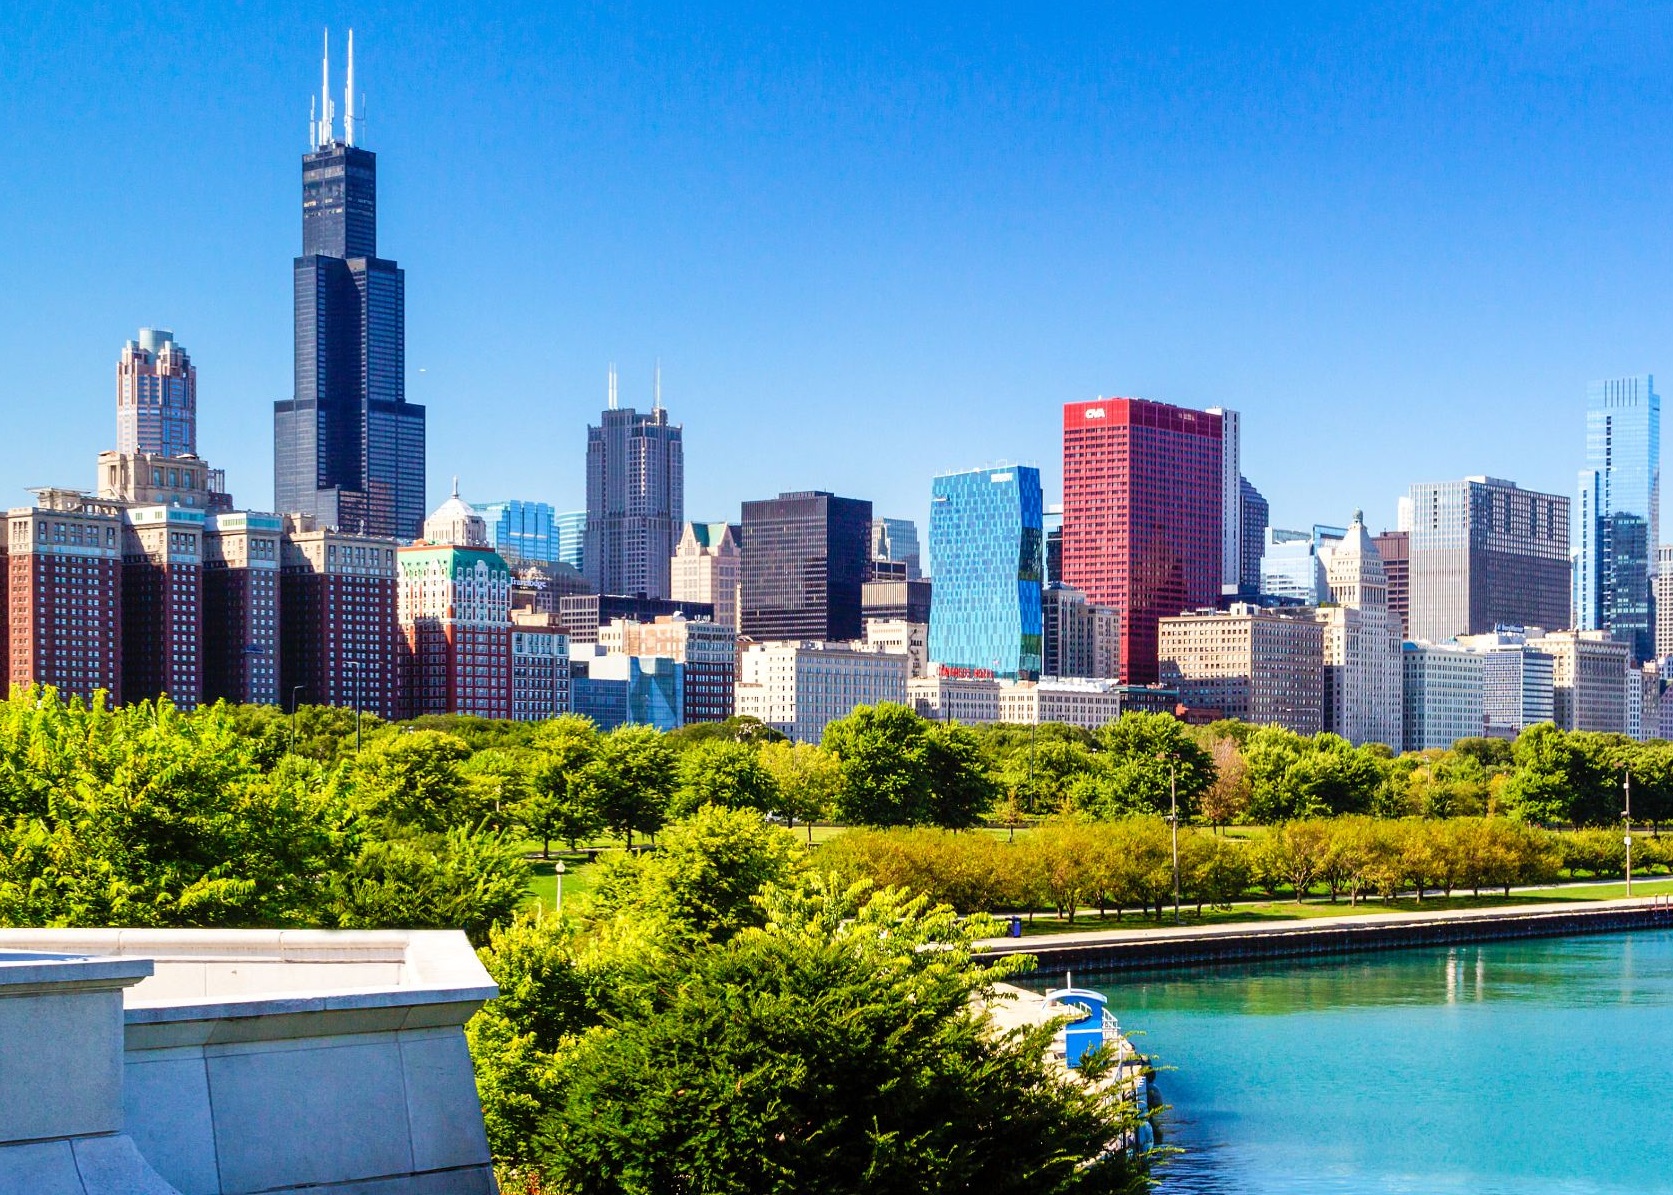 2022 Chicago Skyline: 9 Iconic Chicago Buildings and How to Explore Them